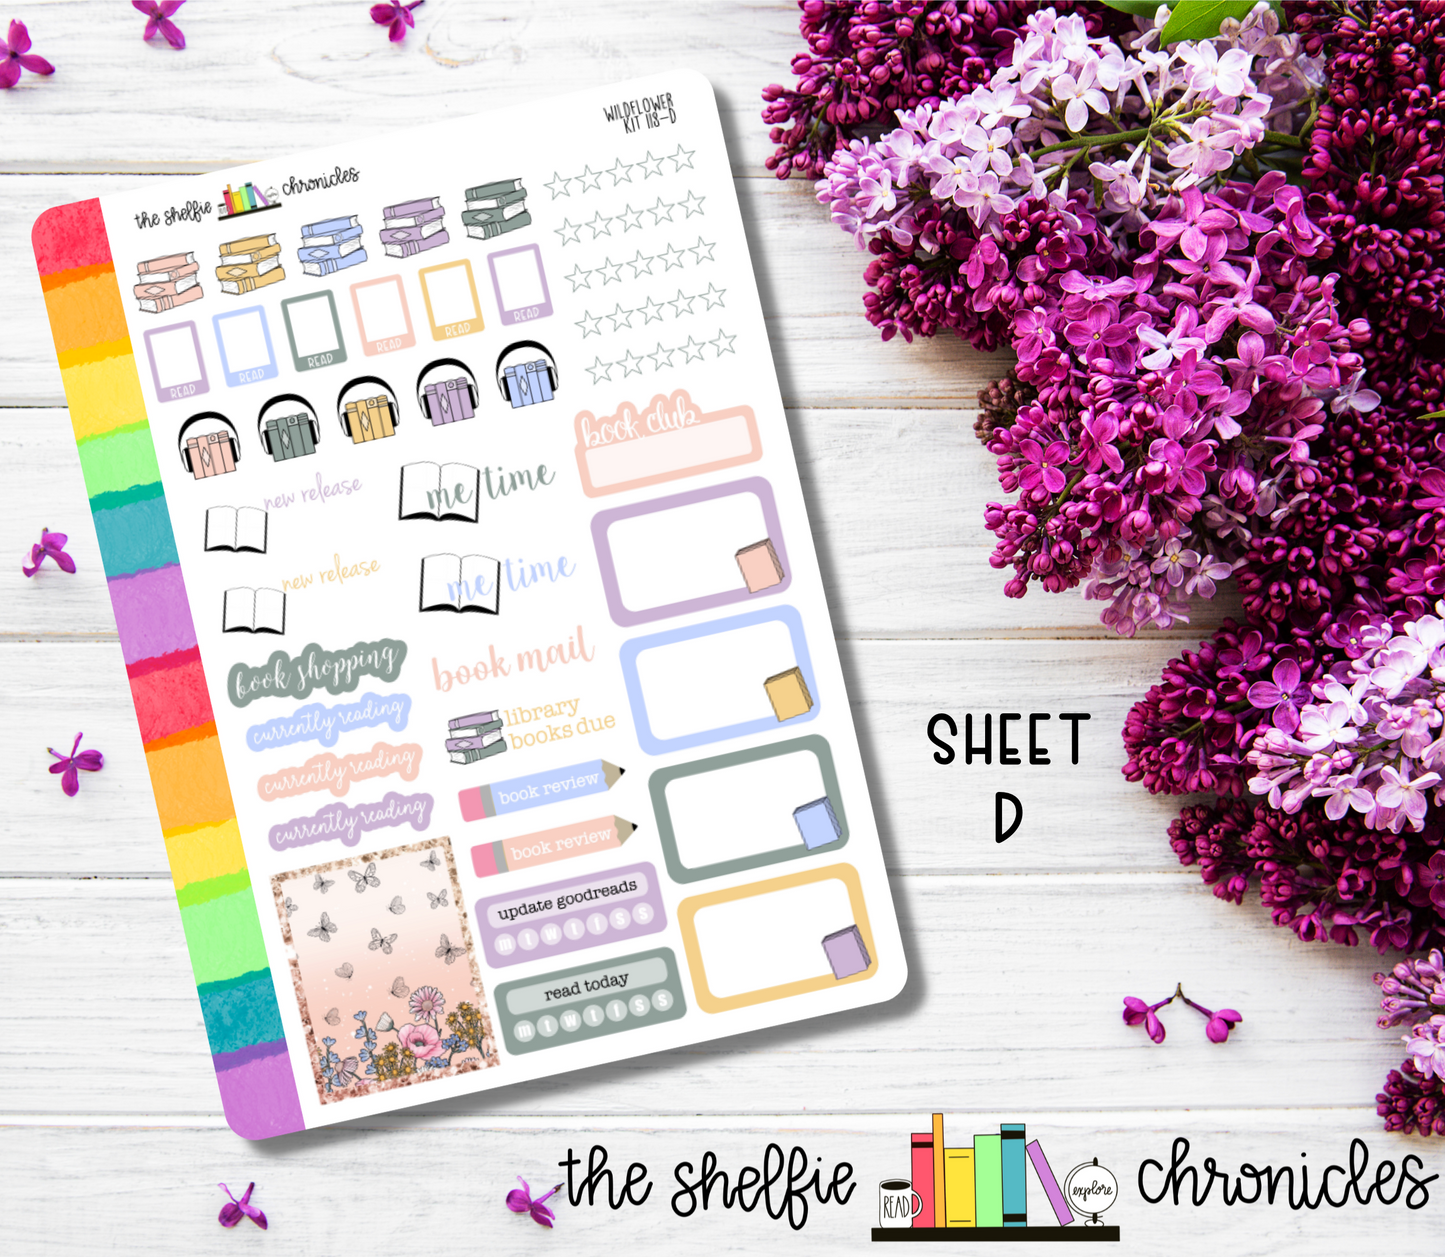 Kit 118 - Wildflower Weekly Kit - Die Cut Stickers - Repositionable Paper - Made To Fit 7x9 Planners